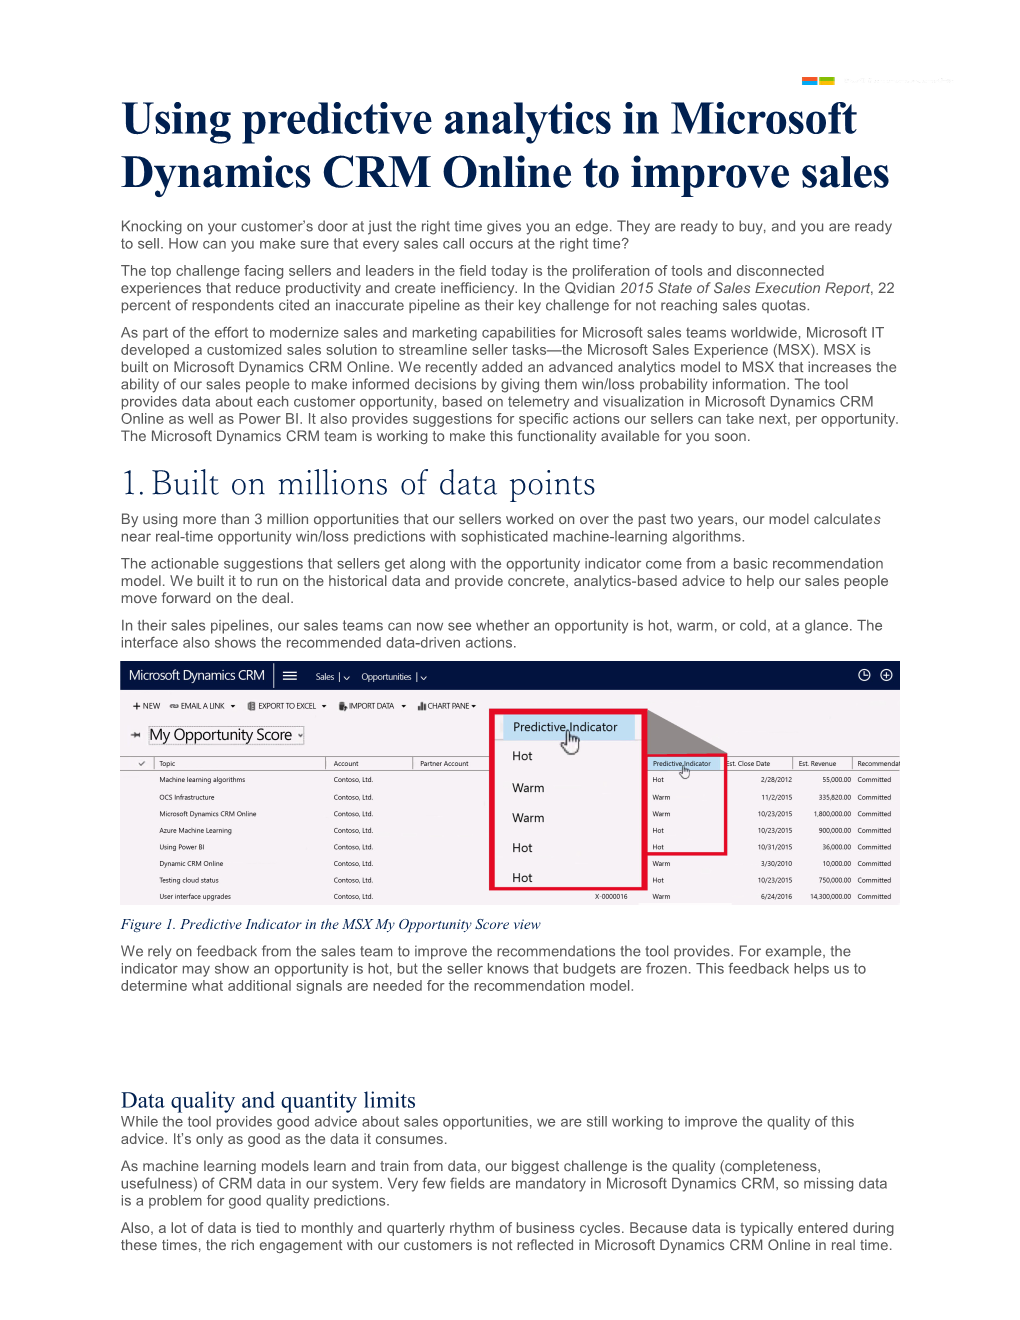 Using Predictive Analytics in Microsoft Dynamics CRM Online to Improve Sales